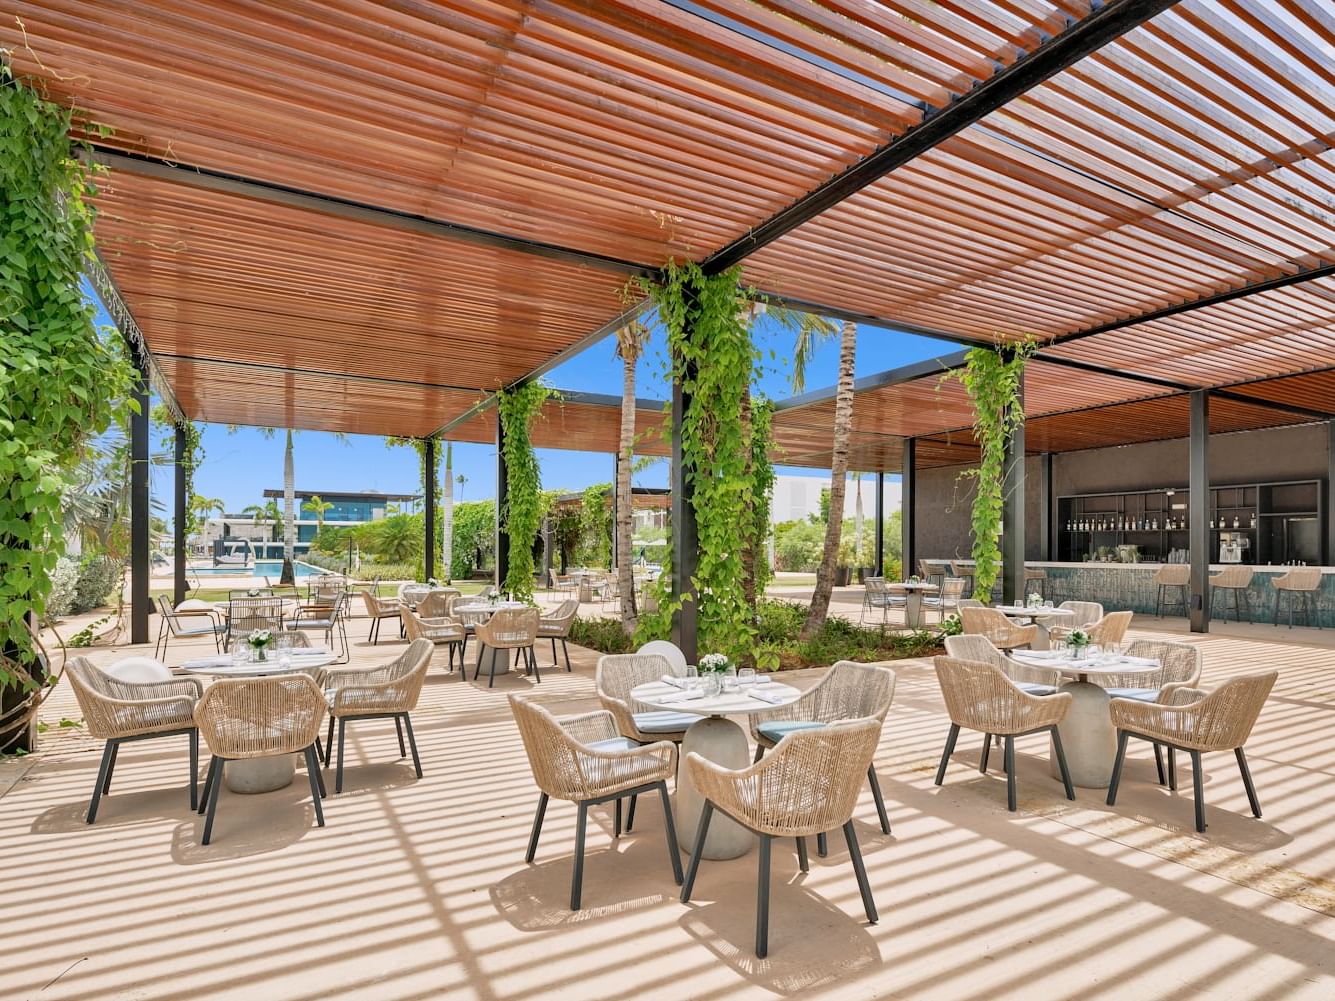 Outdoor dining tables arranged in Wonderpool at Live Aqua Resorts and Residence Club